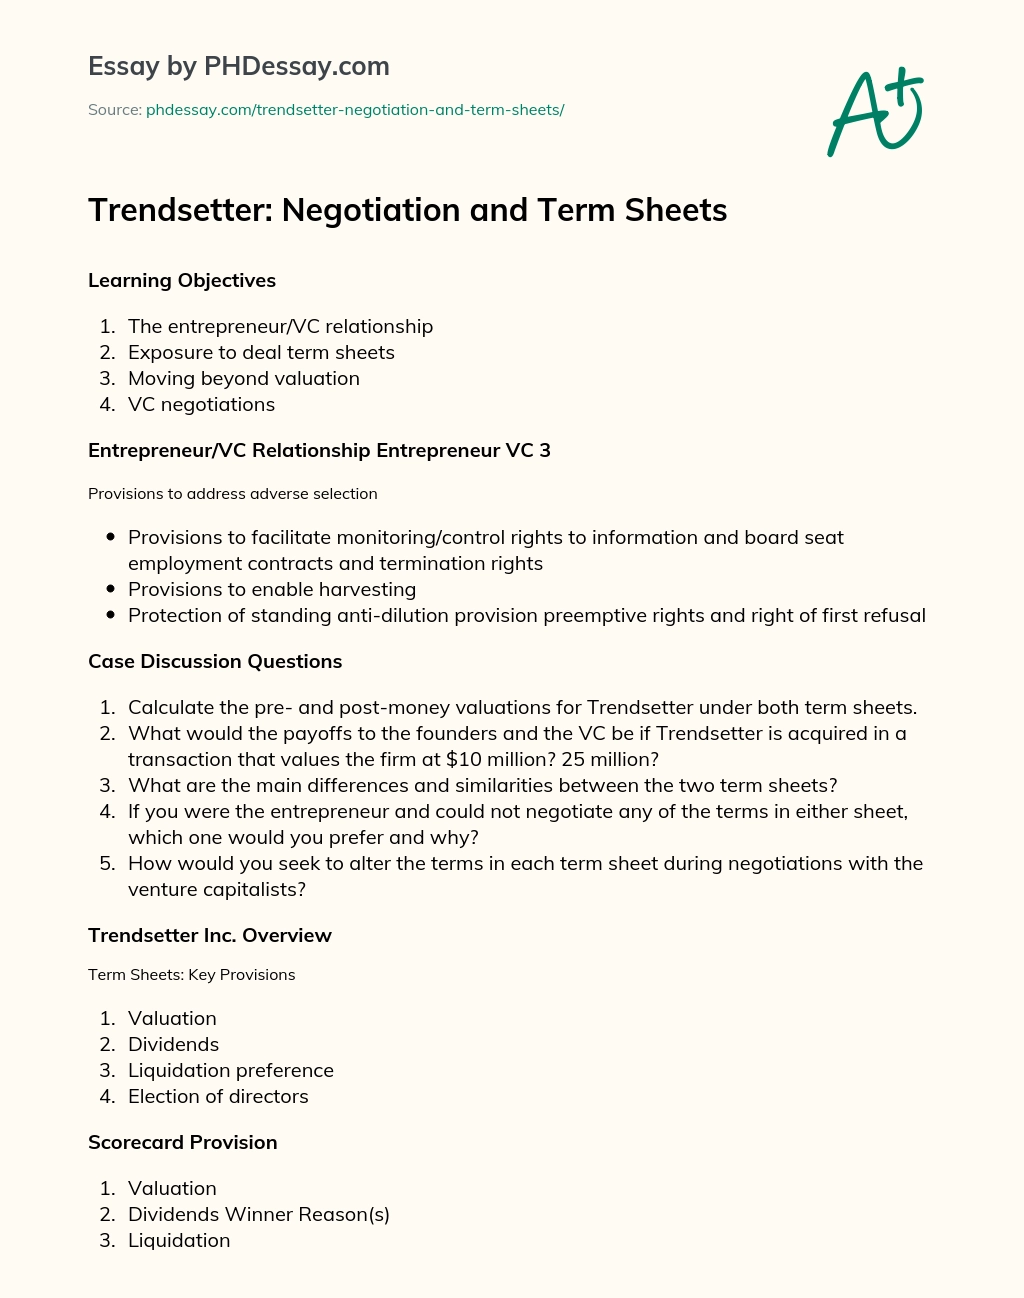 Trendsetter: Negotiation and Term Sheets essay